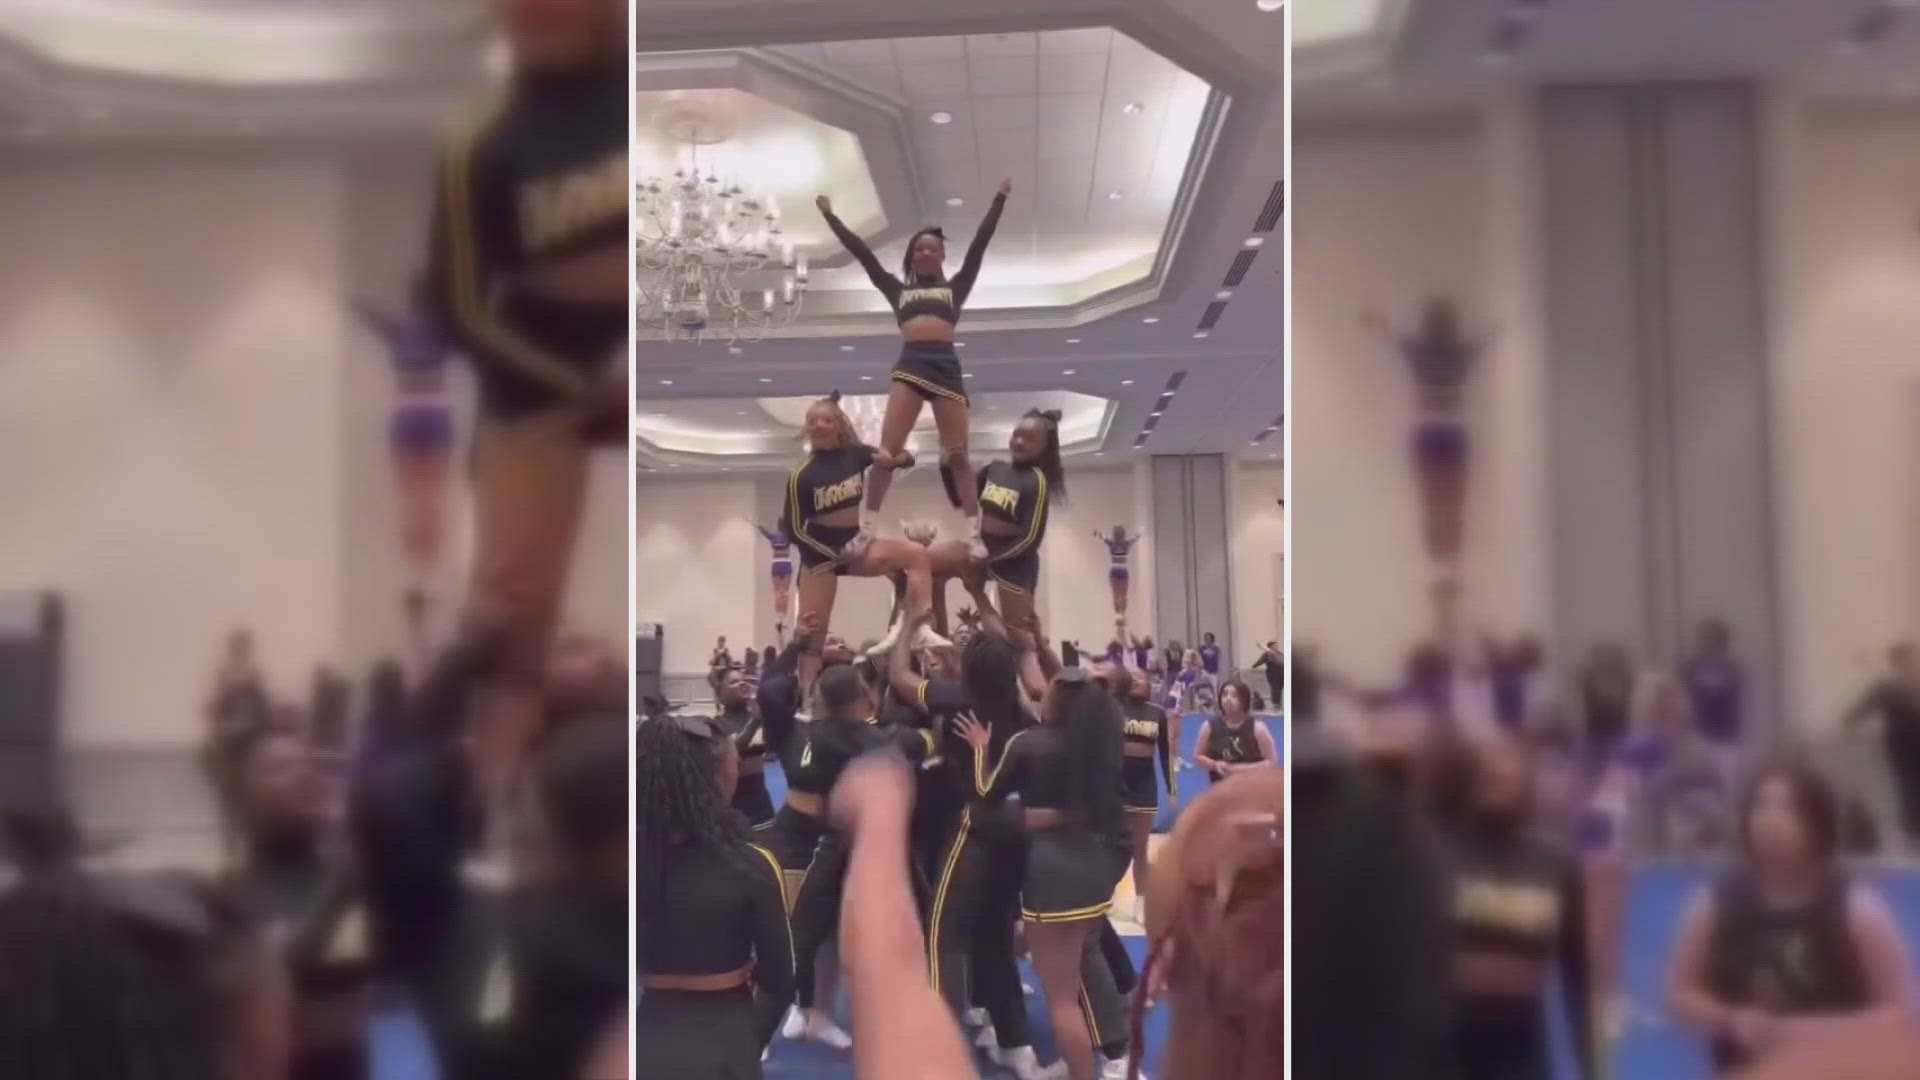 XULA cheer beat Westcliff 91.3375 to 89.7166, making it the second national title the program has received in five years.